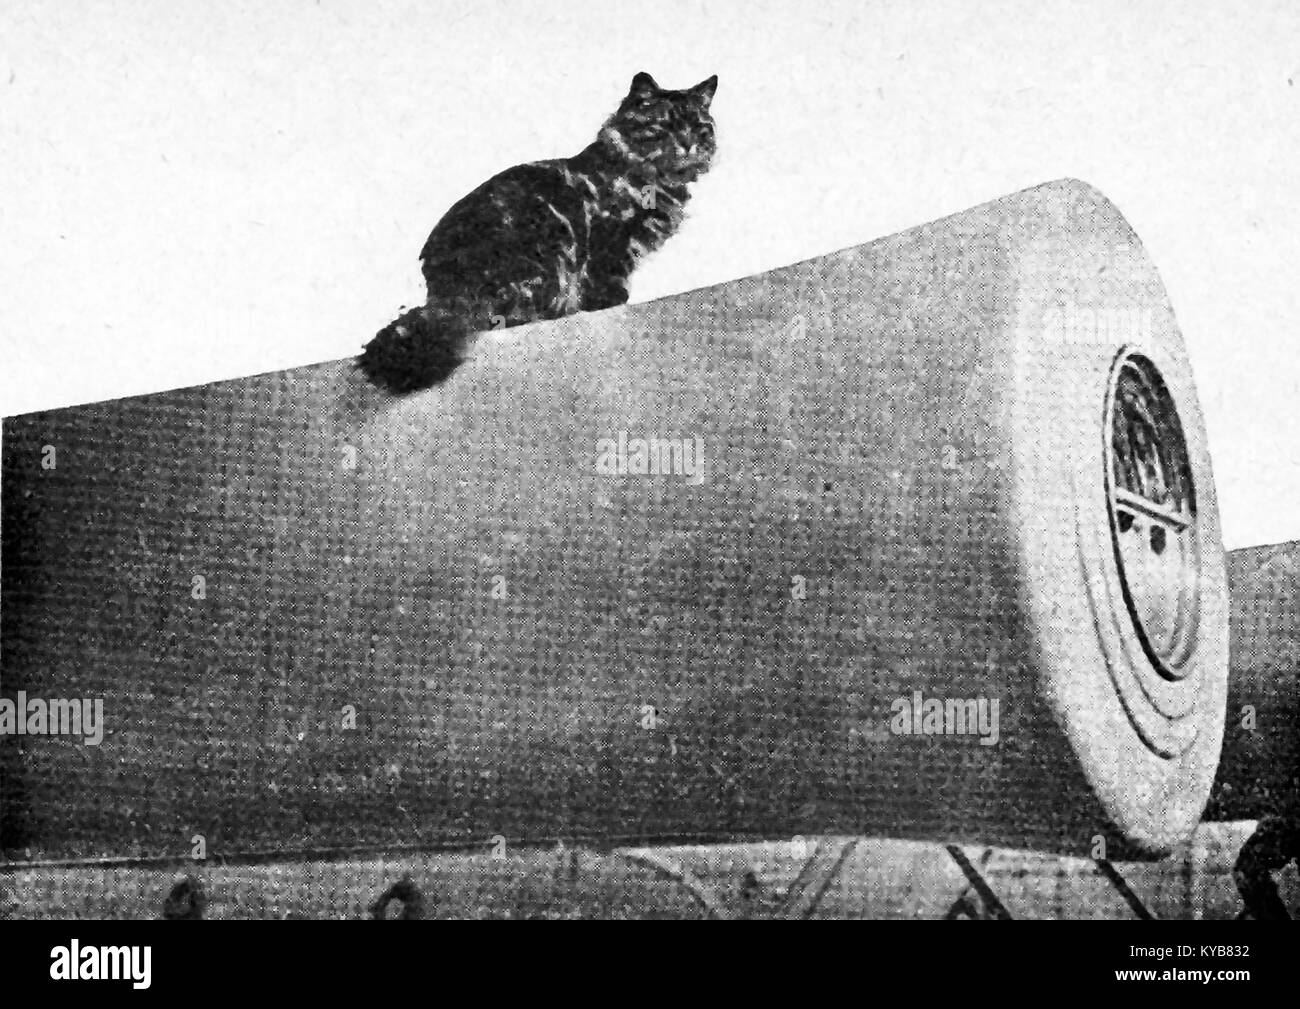 A Royal navy Ship's cat sitting on a cannon gun - WWI  1918 Stock Photo